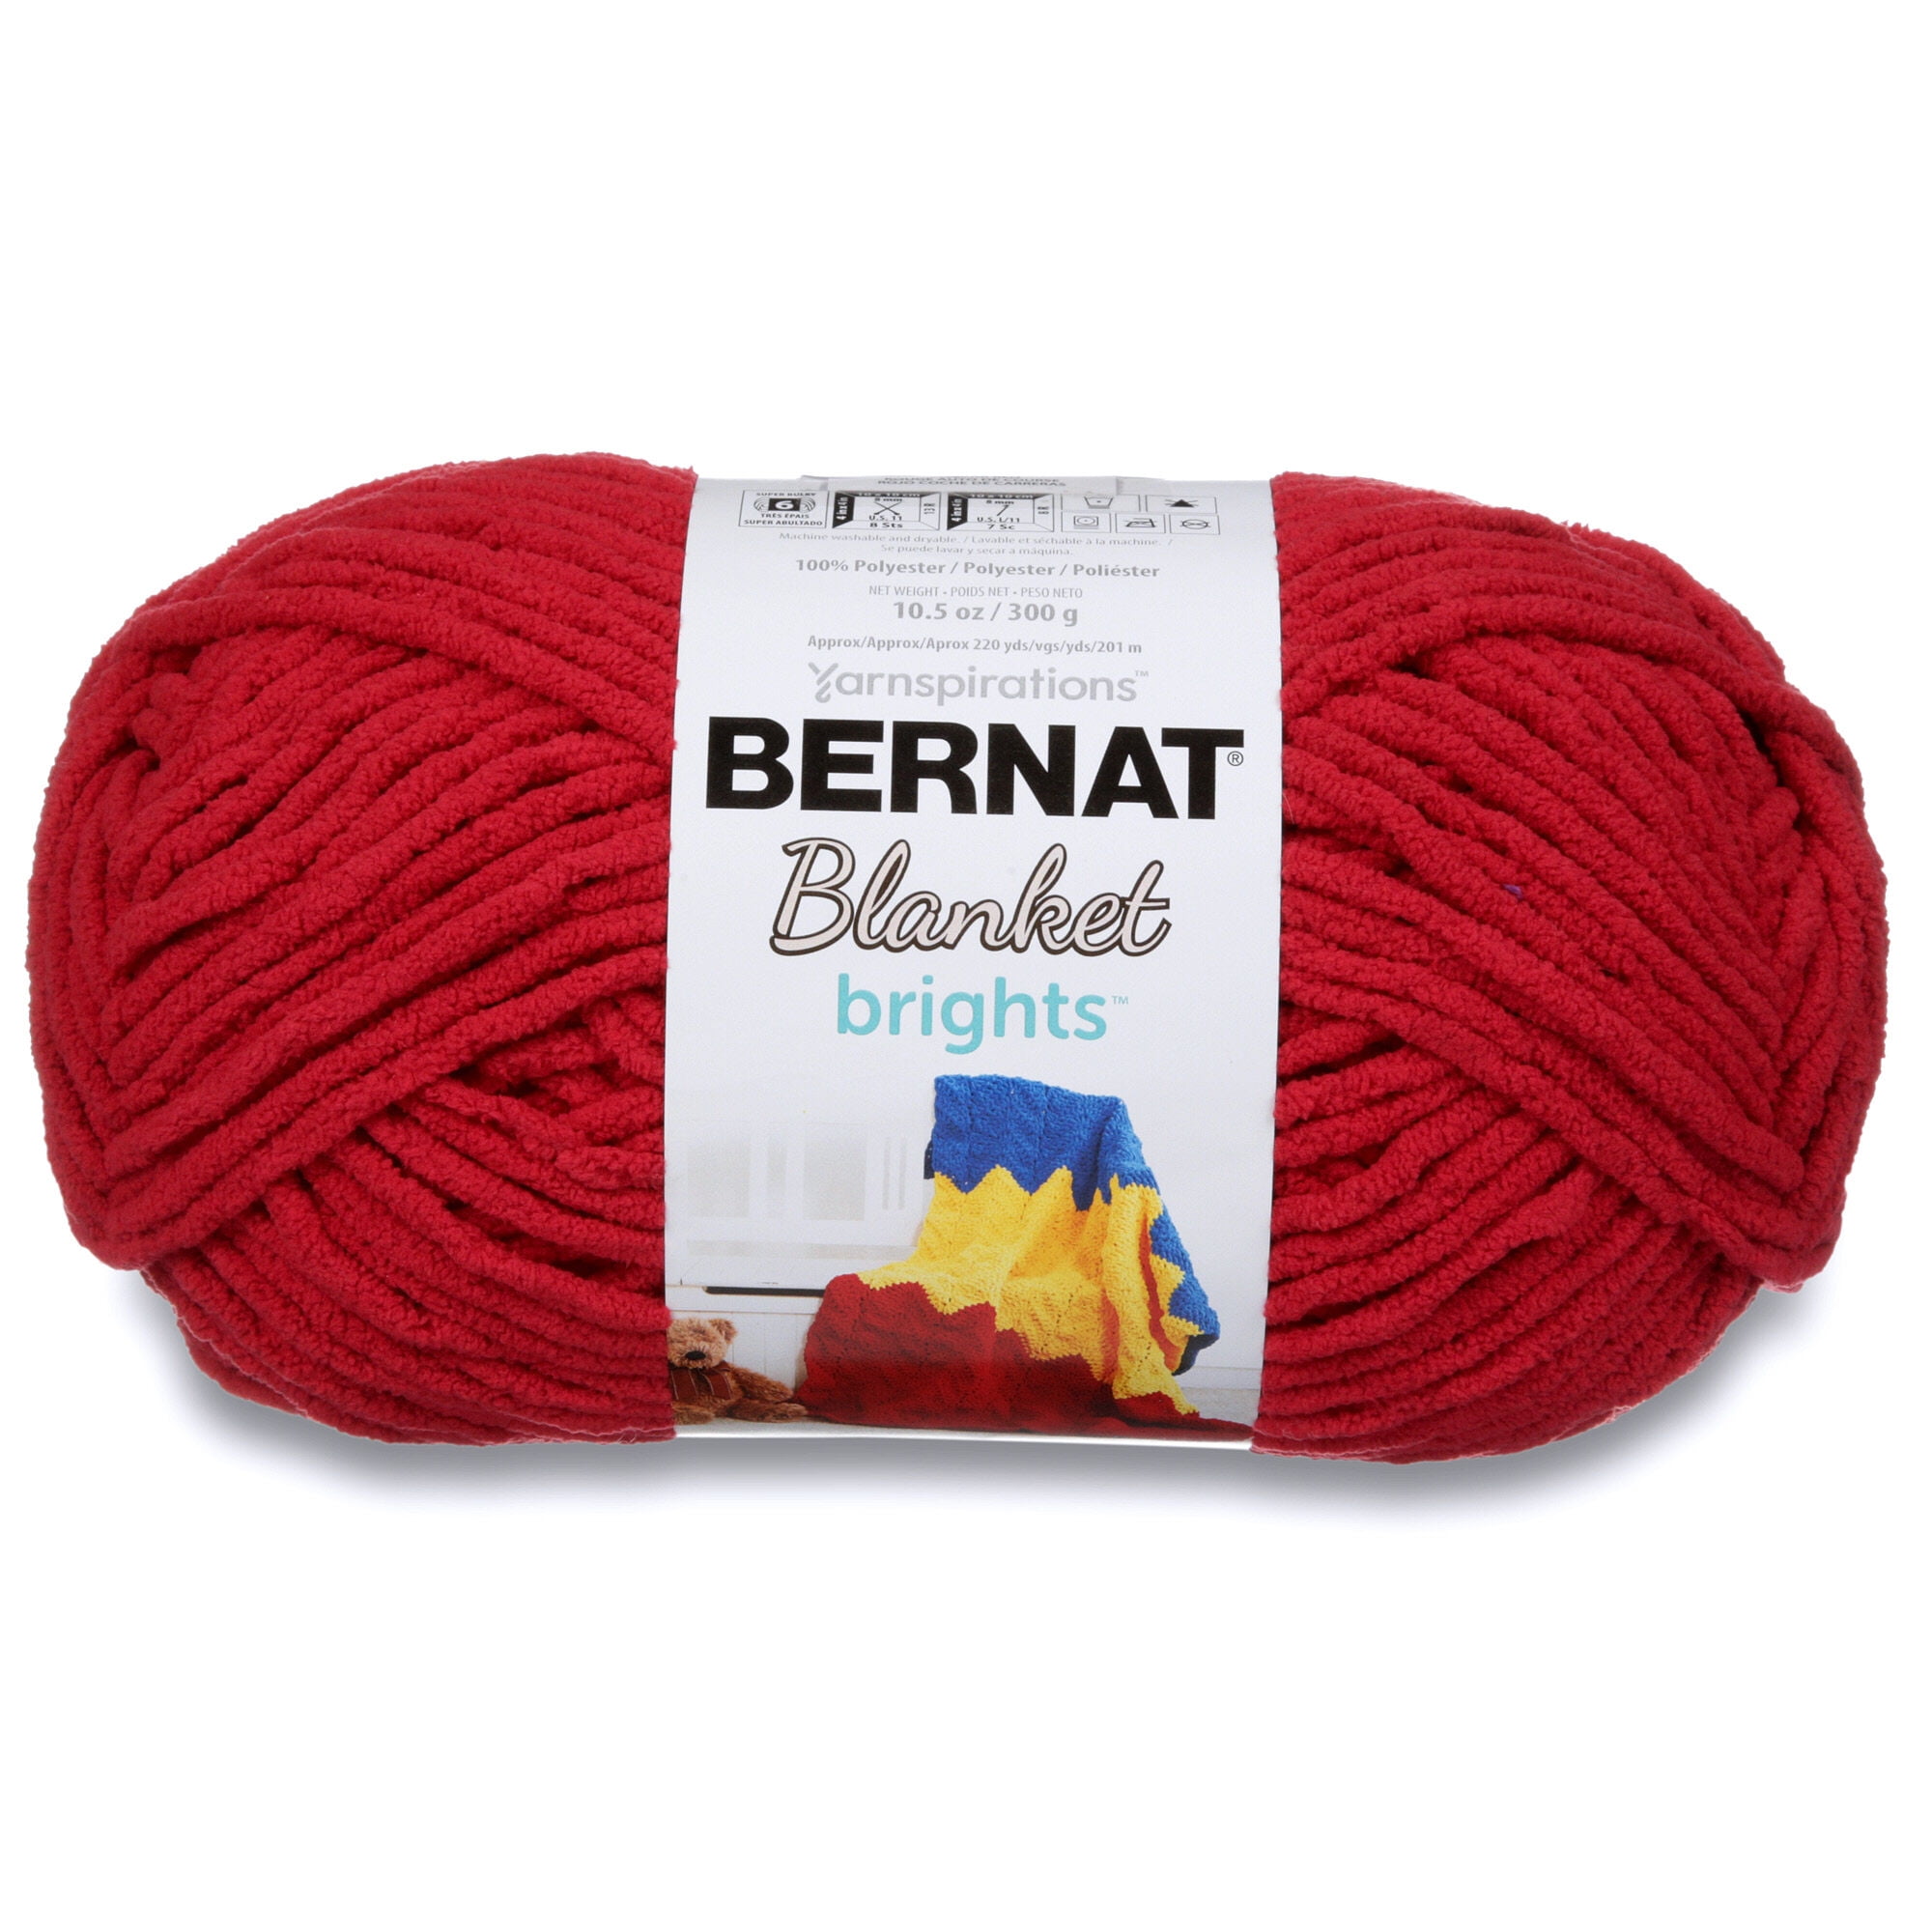 Multipack of 6 - Bernat Blanket Brights Yarn-Race Car Red, Notions  Marketing Employees, Friends and Families